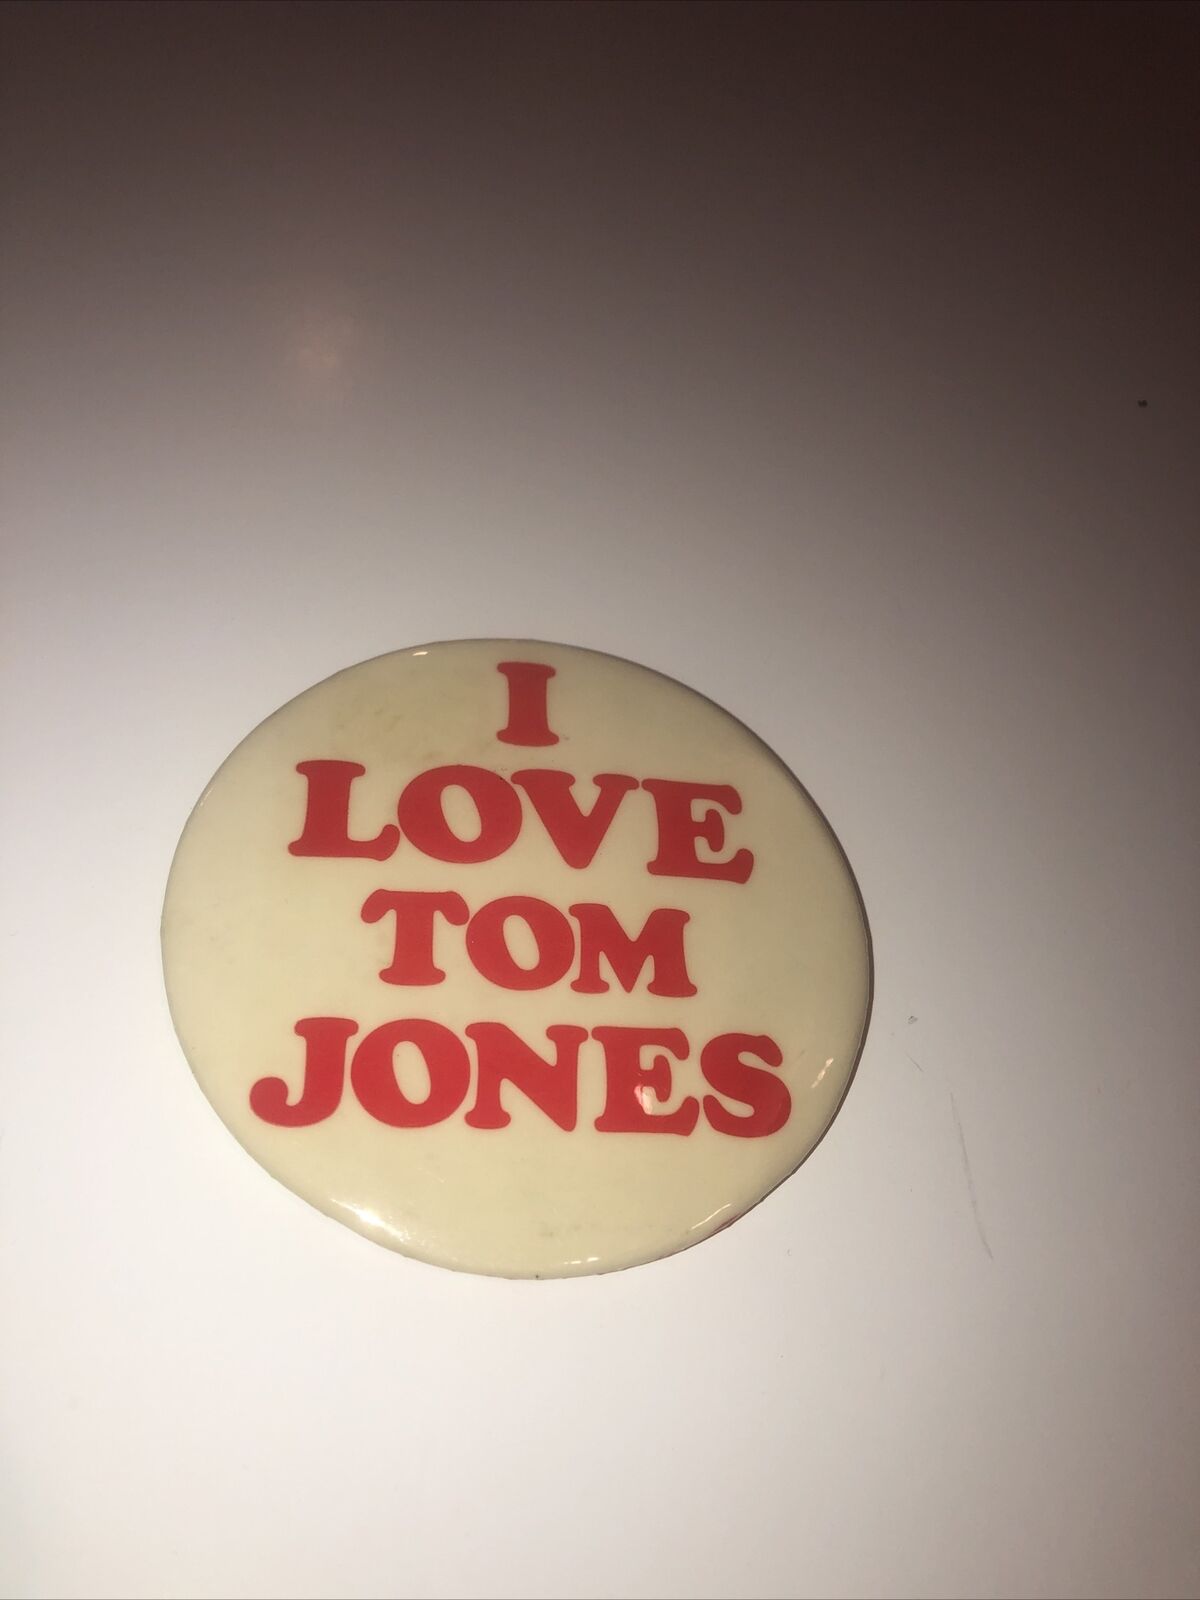 I Love Tom Jones button Sale price pin 70’s vintage Seventies badge pinback A surprise price is realized